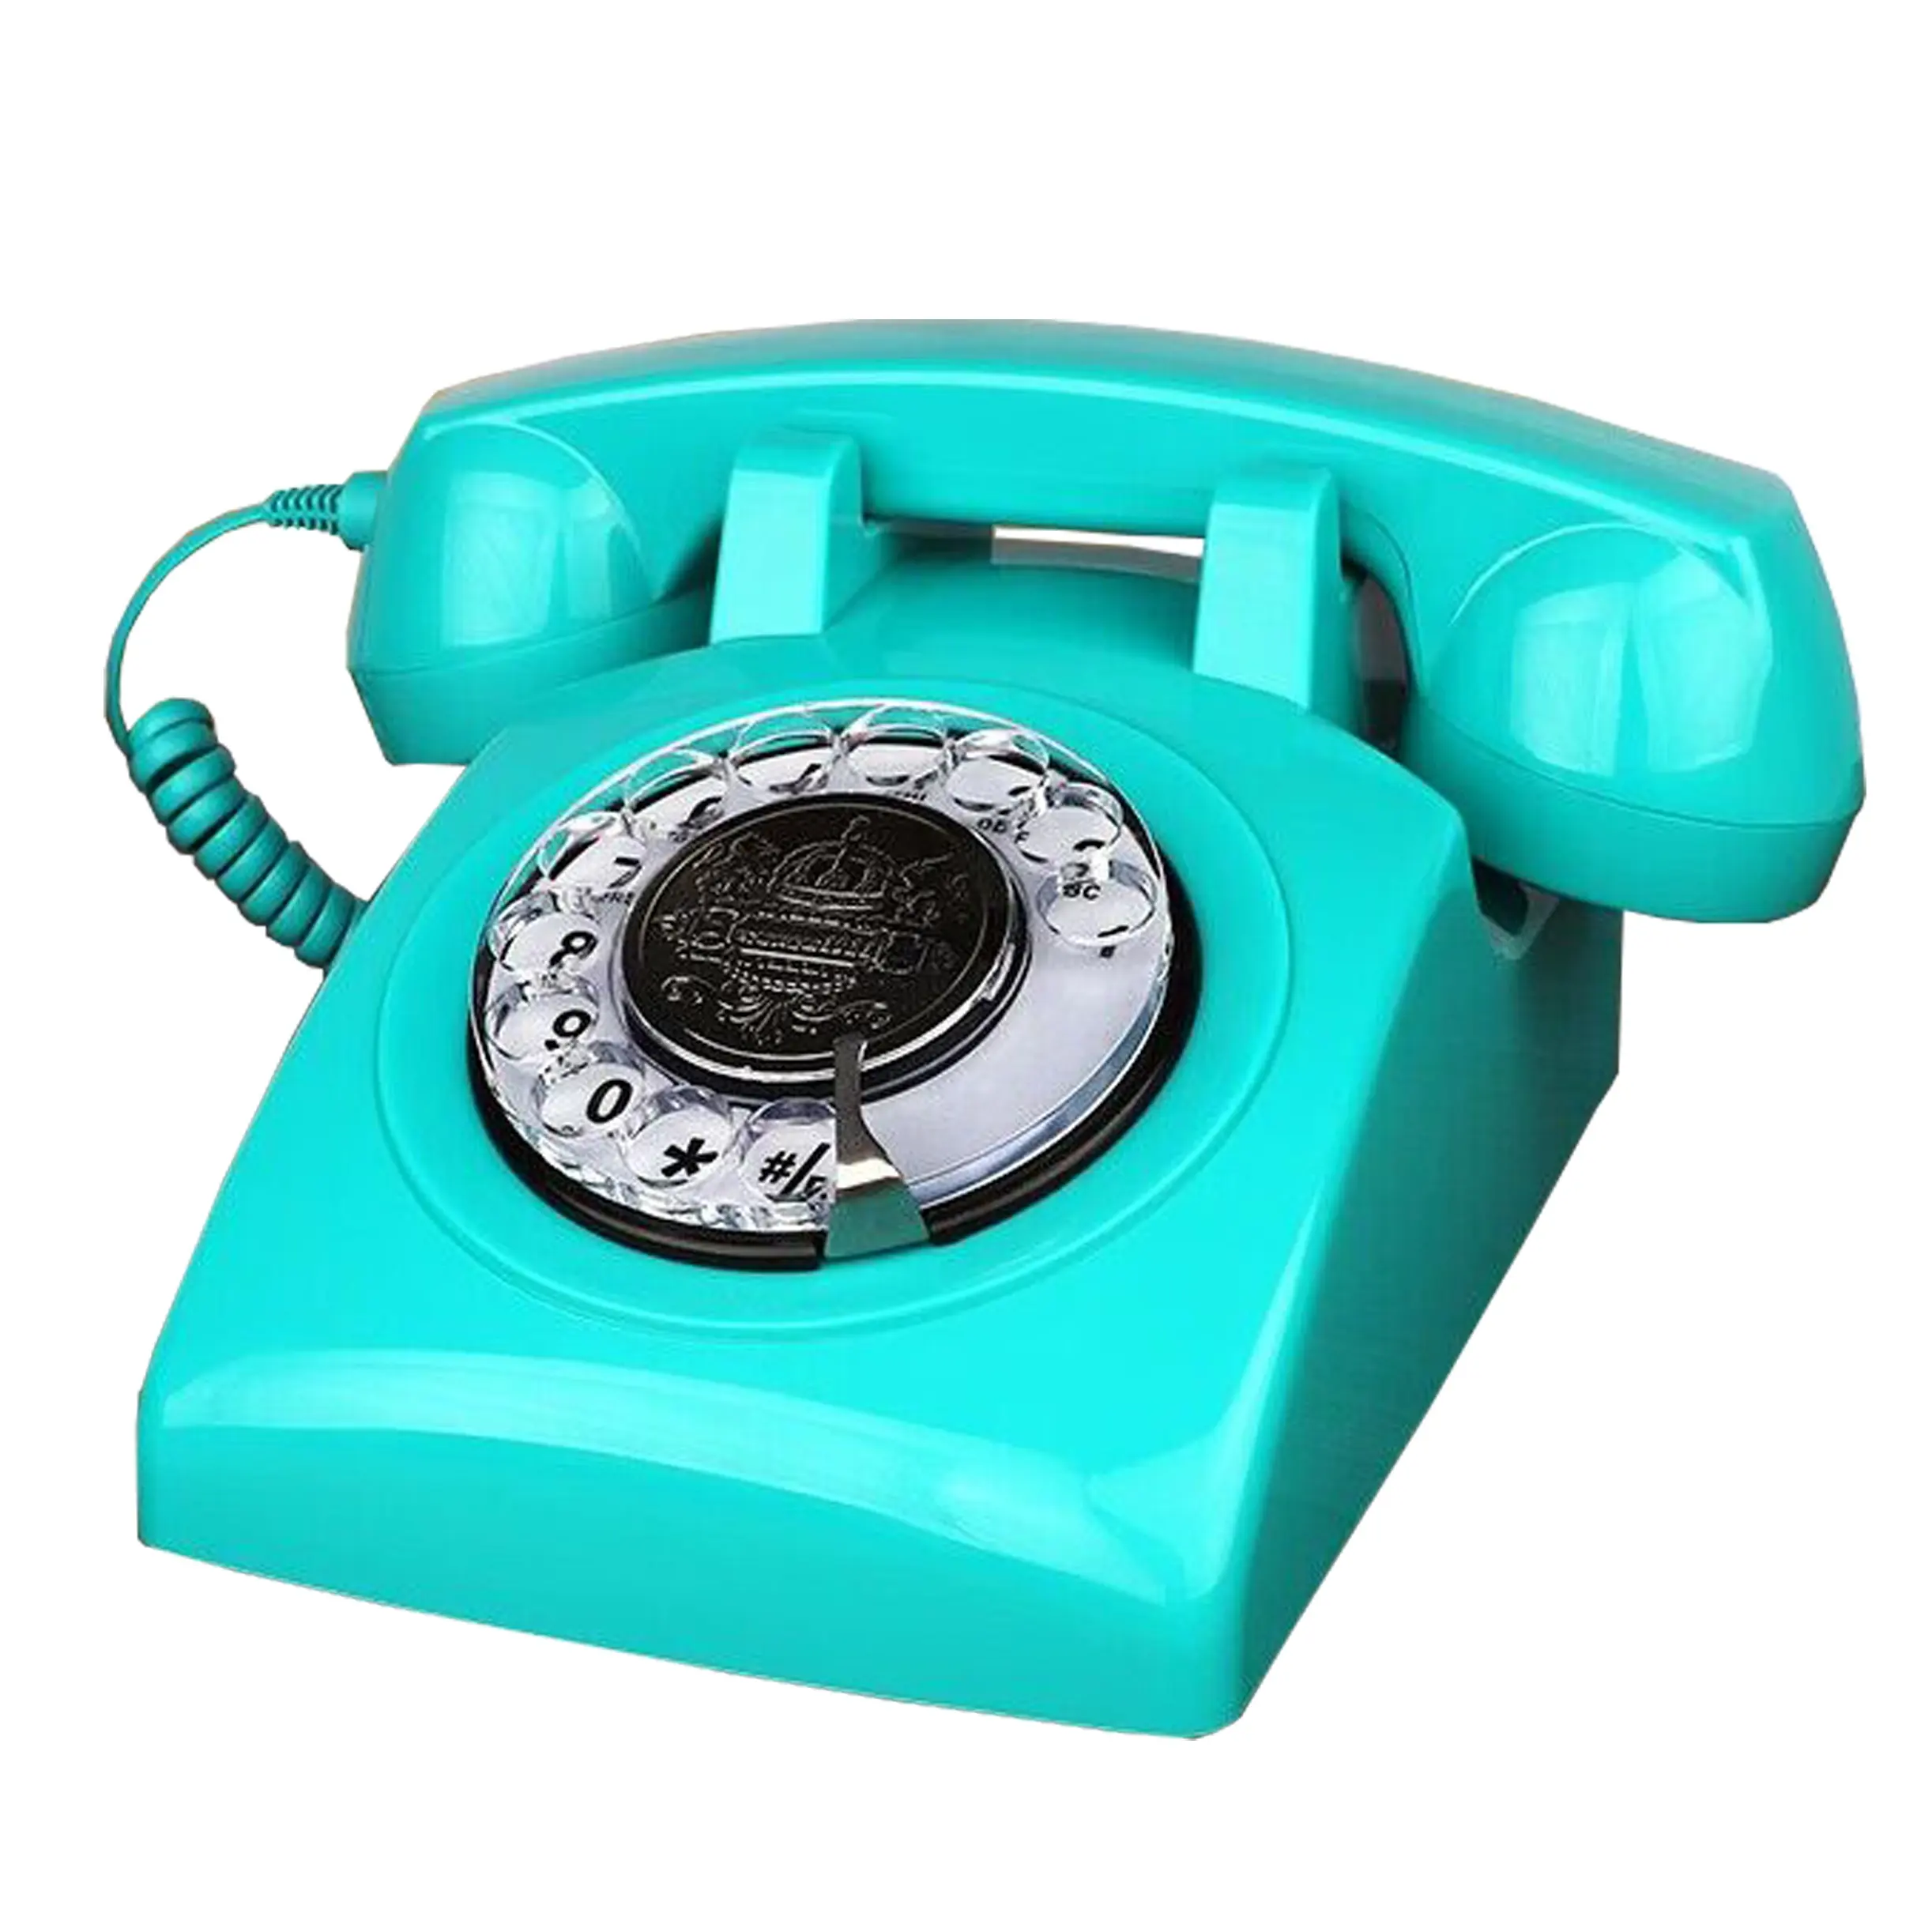 Old style telephone Rotary dial antique telephone SIM card desk phone use for office